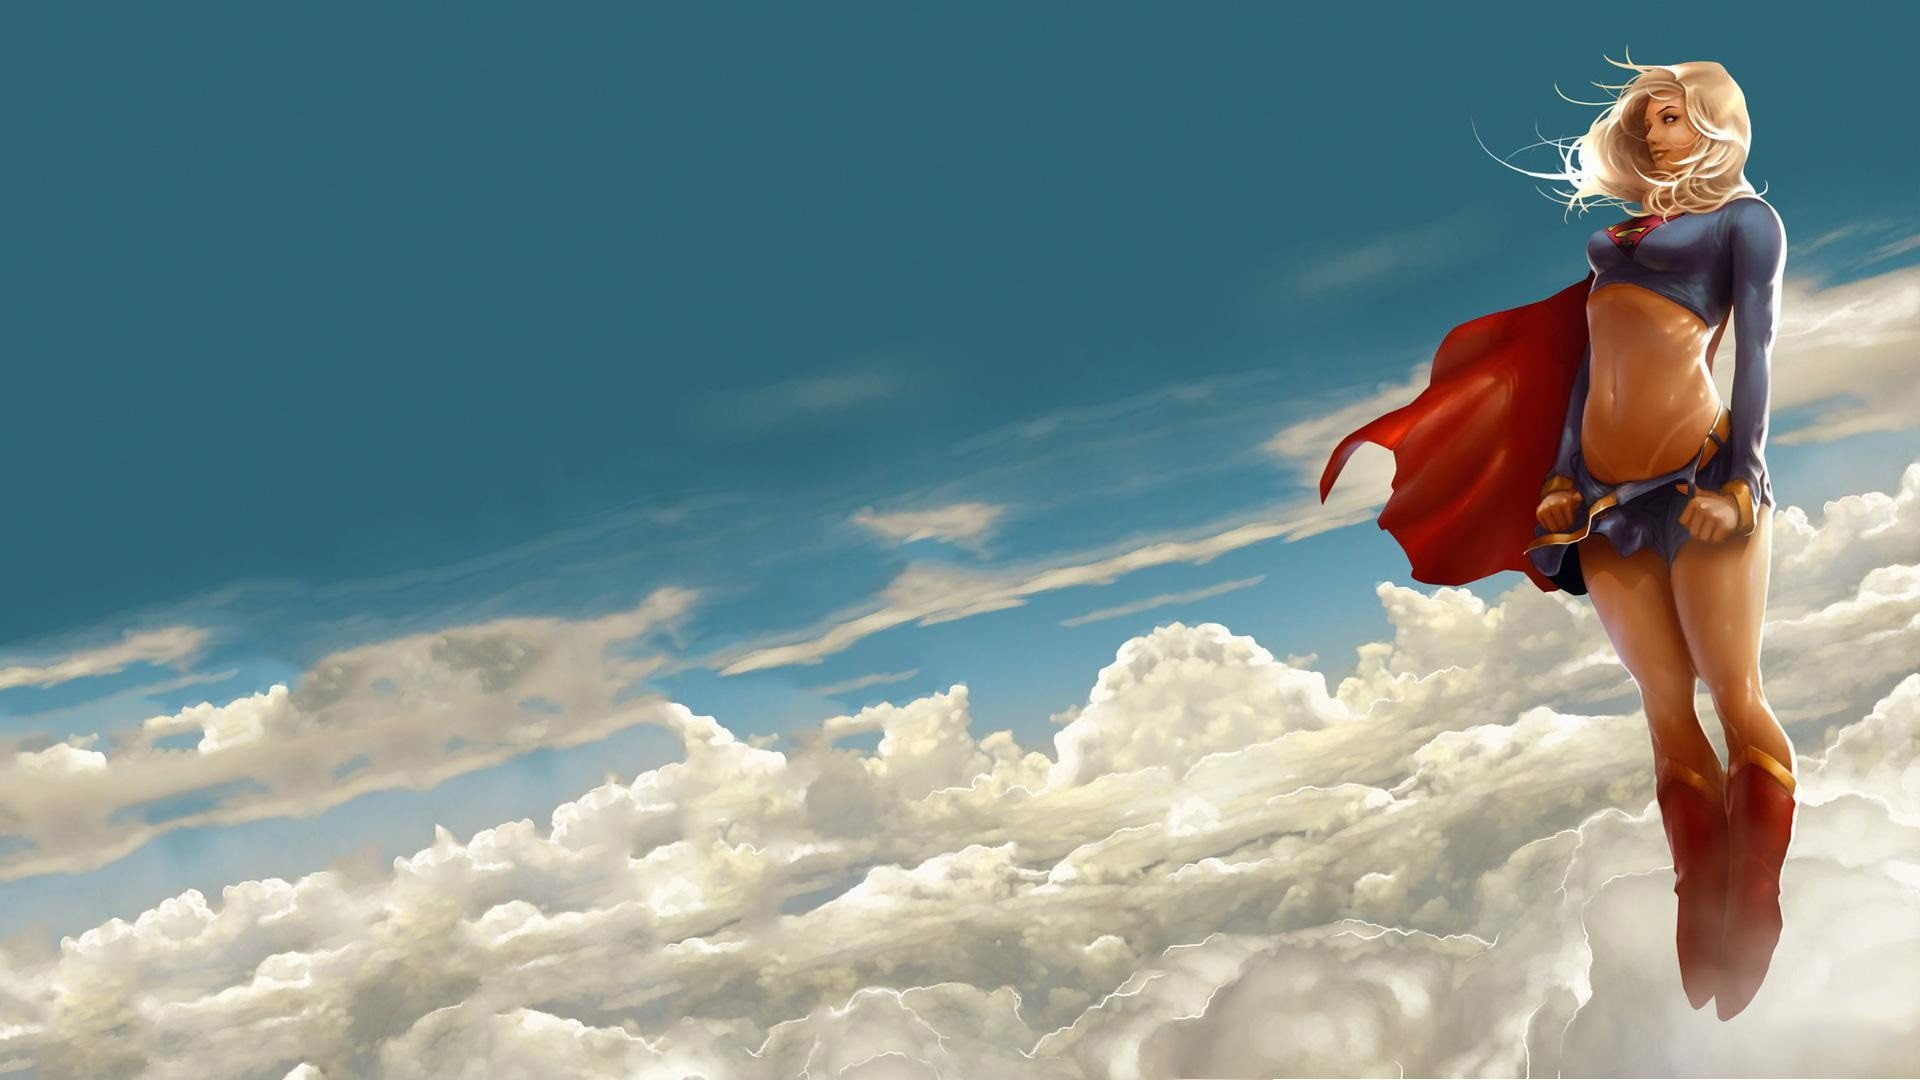 supergirl dc comics illustration, cloud - sky, one person, hair